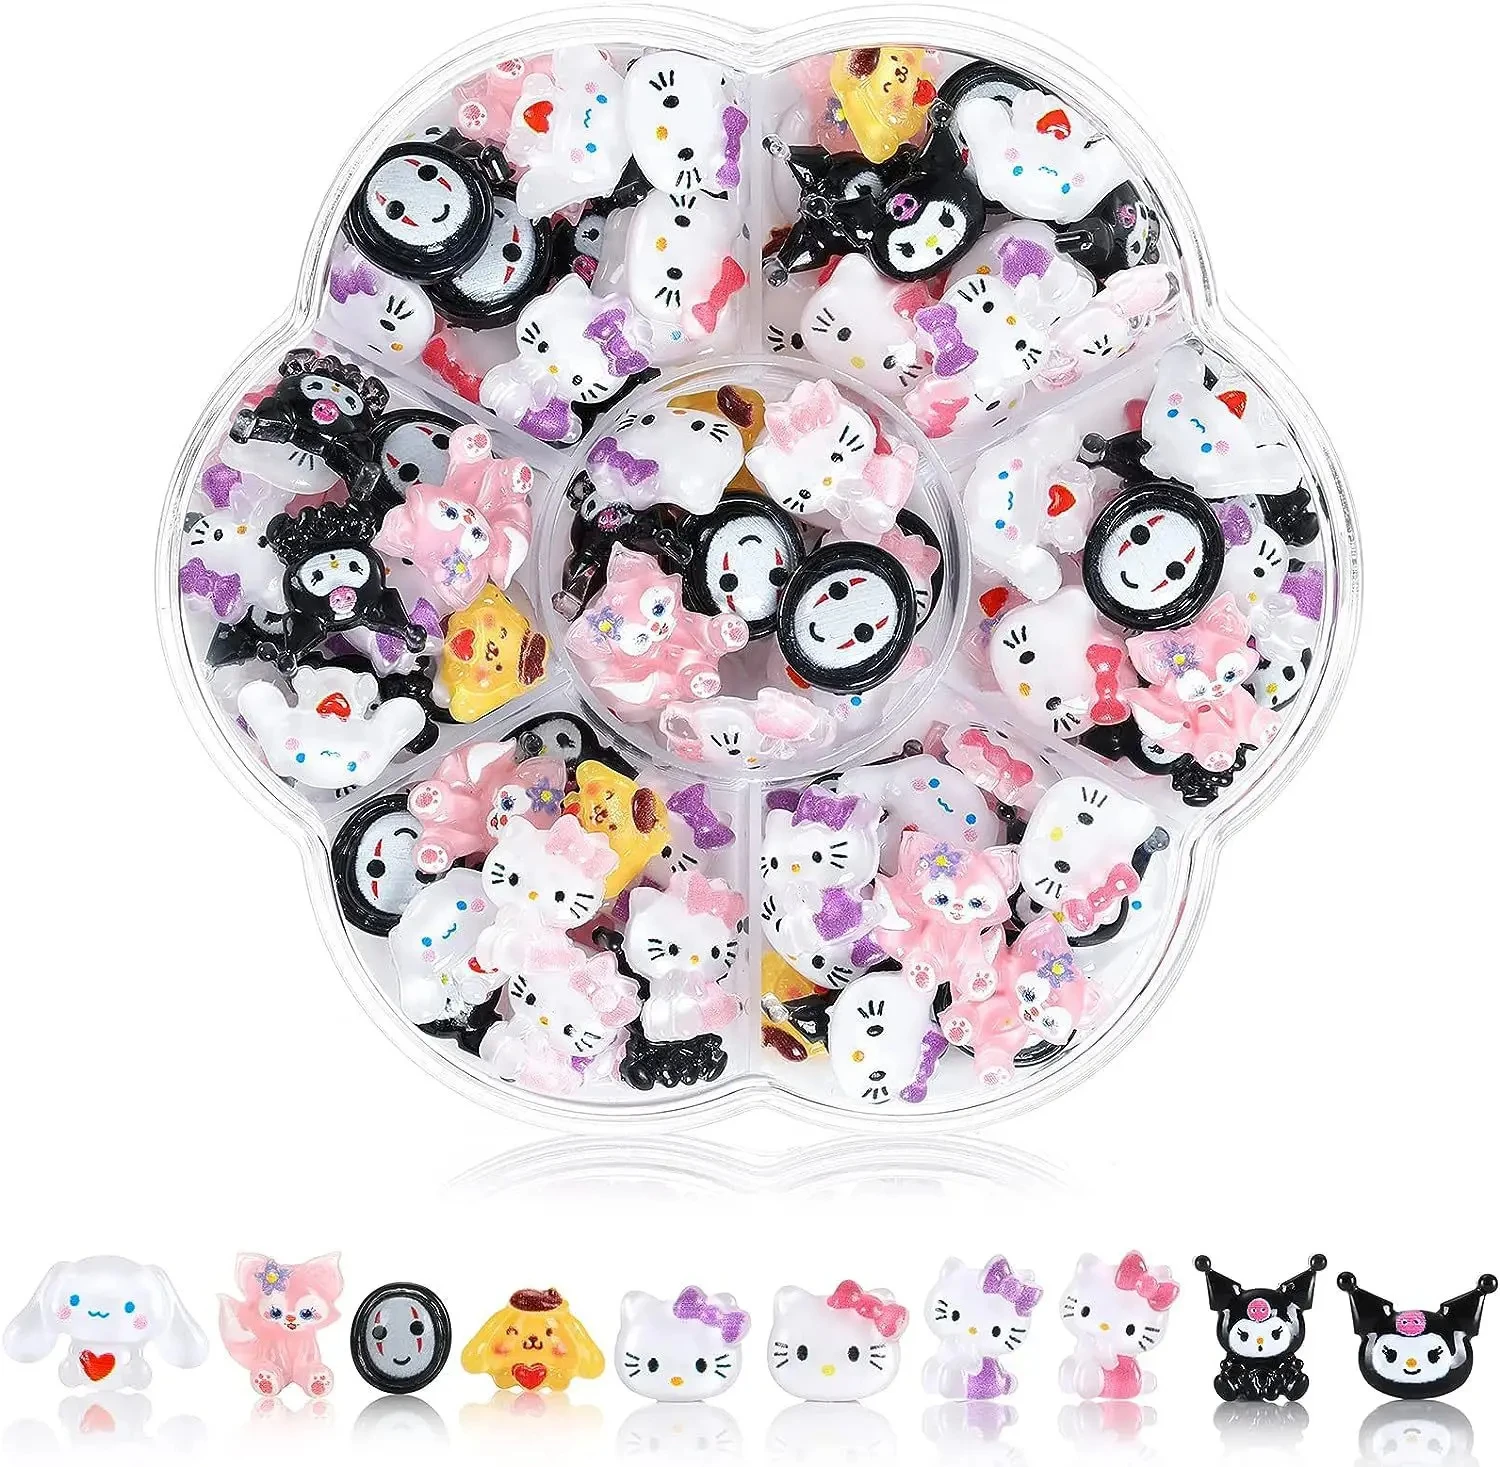 70Pcs/box Sanrio Fake Nail Jewelry Set Cartoon Hello Kitty Cinnamoroll Mymelody Diy Anime Accessories Charms Gems Kit Diy Crafts 1pcs craft diy transparent uv resin liquid silicone mold rectangle bookmarks resin molds for diy pendant charms making jewelry